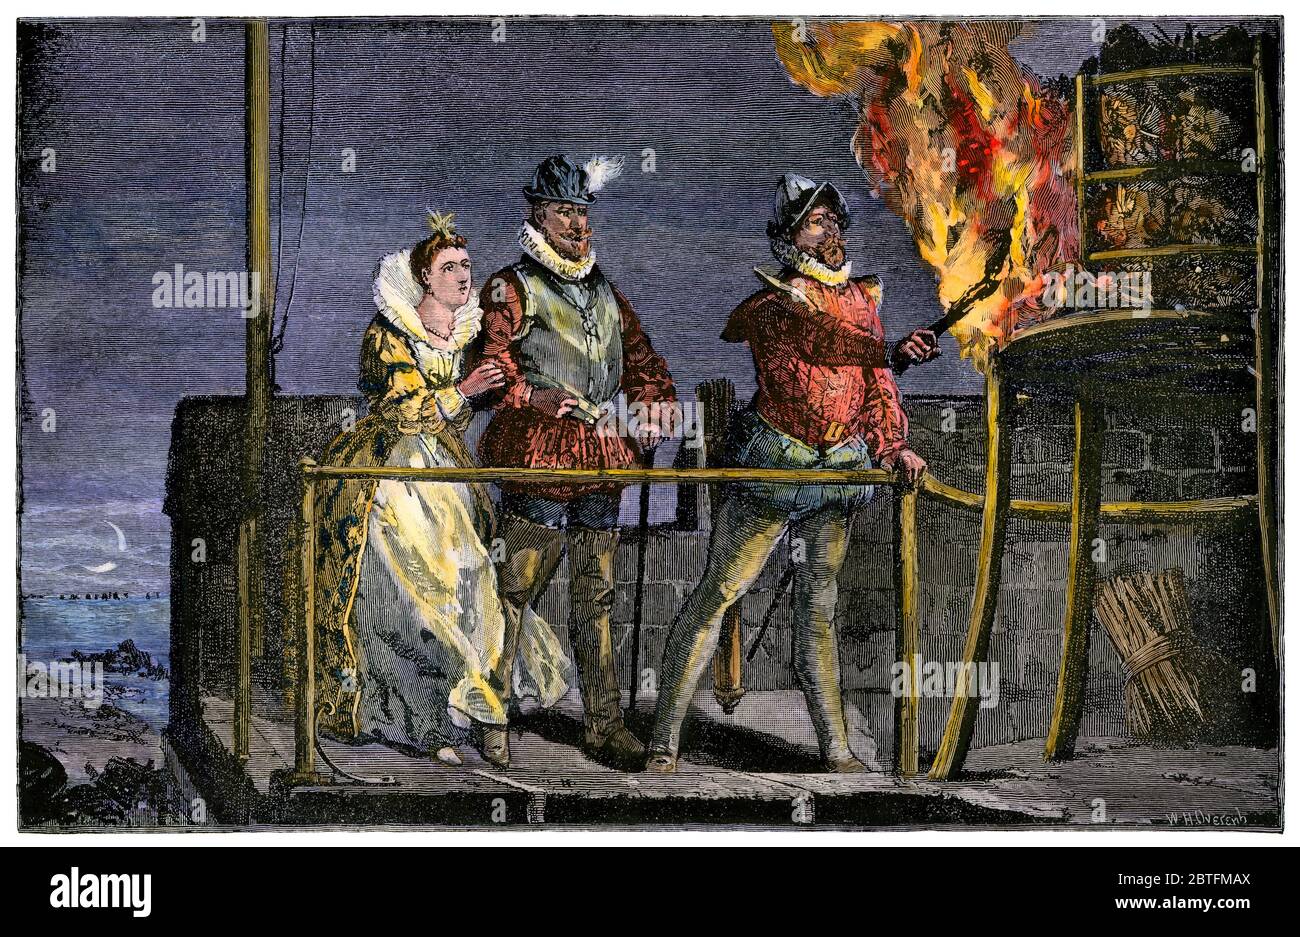 Watchtower guard lighting a beacon to warn England of Spanish Armada's approach, 1588. Hand-colored woodcut Stock Photo